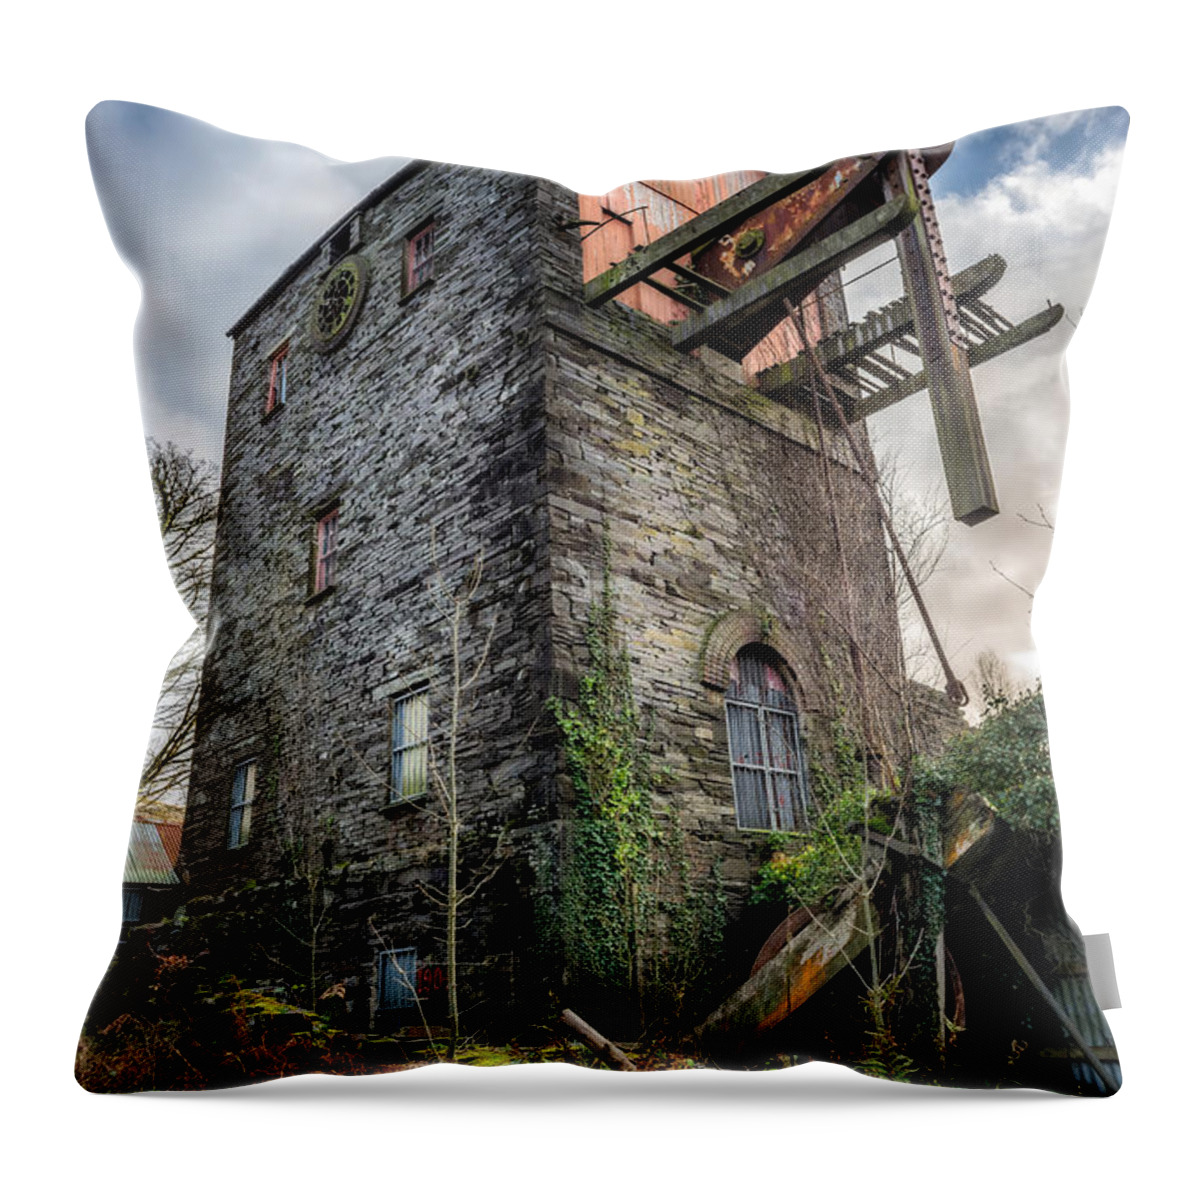 Dorothea Quarry Throw Pillow featuring the photograph Pump House by Adrian Evans